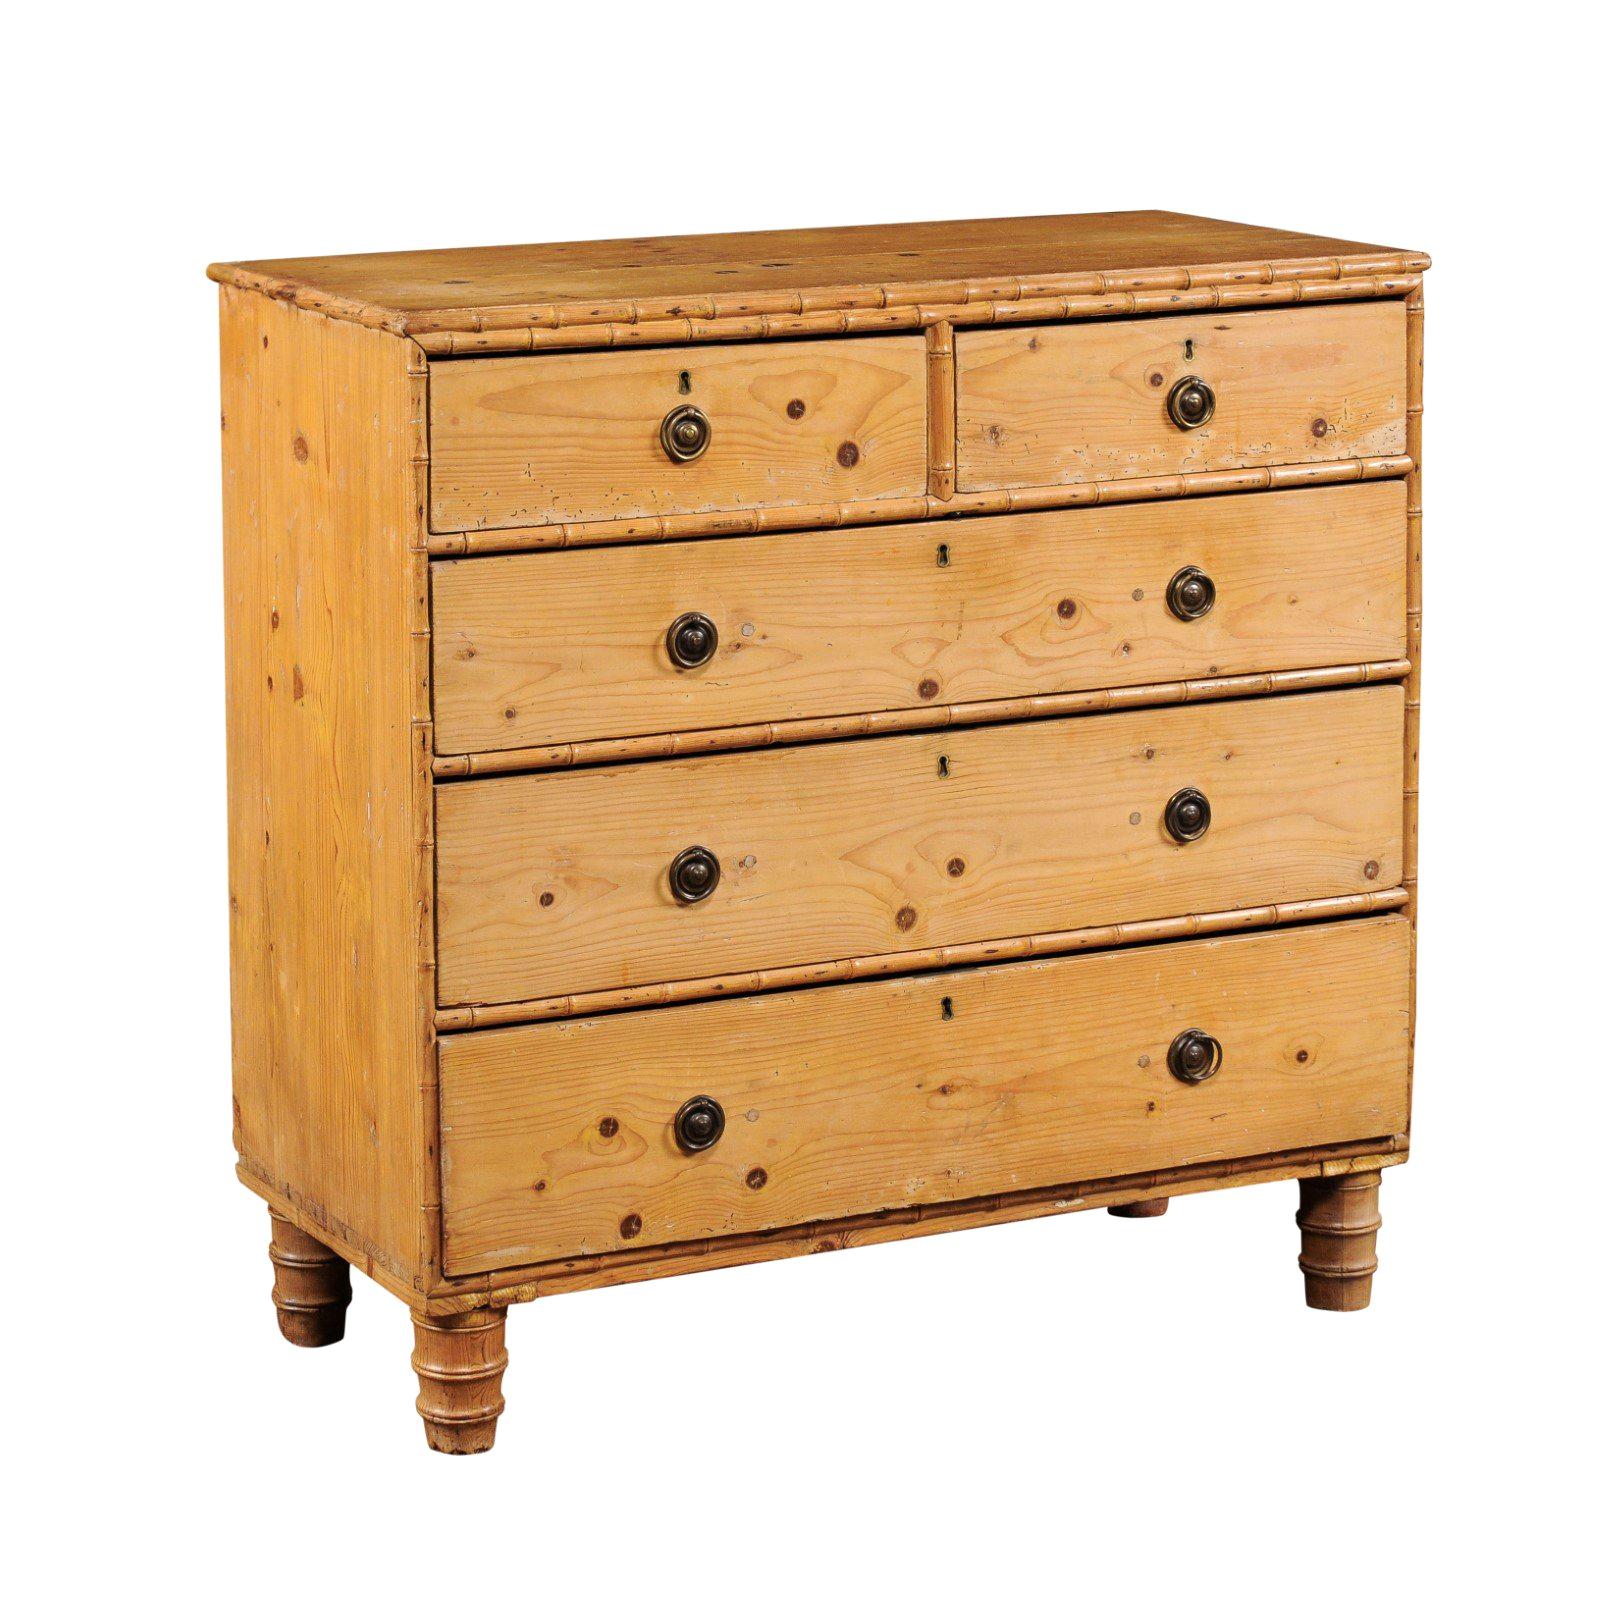 French Faux-Bamboo and Pine Five-Drawer Chest with Cylindrical Feet, circa 1880